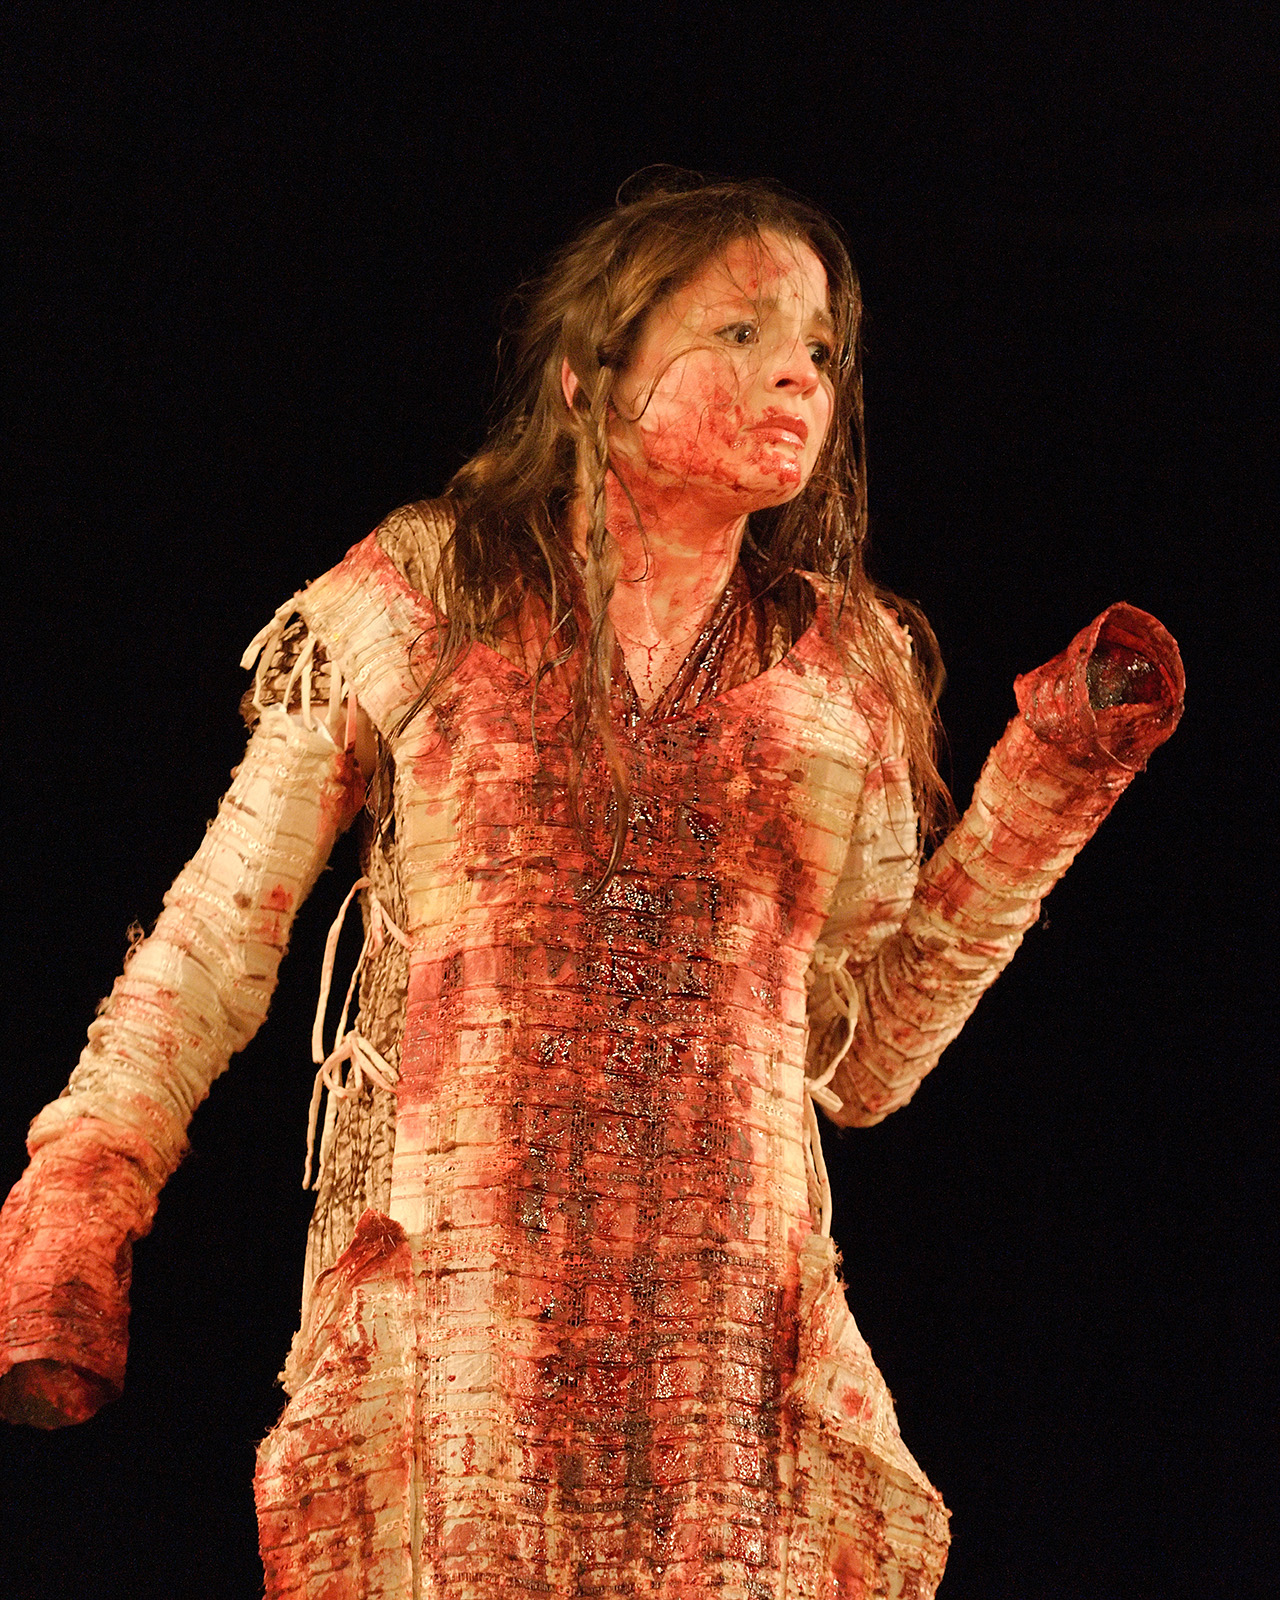 An actor wearing a white dress covered in blood, with their hands severed (faked).